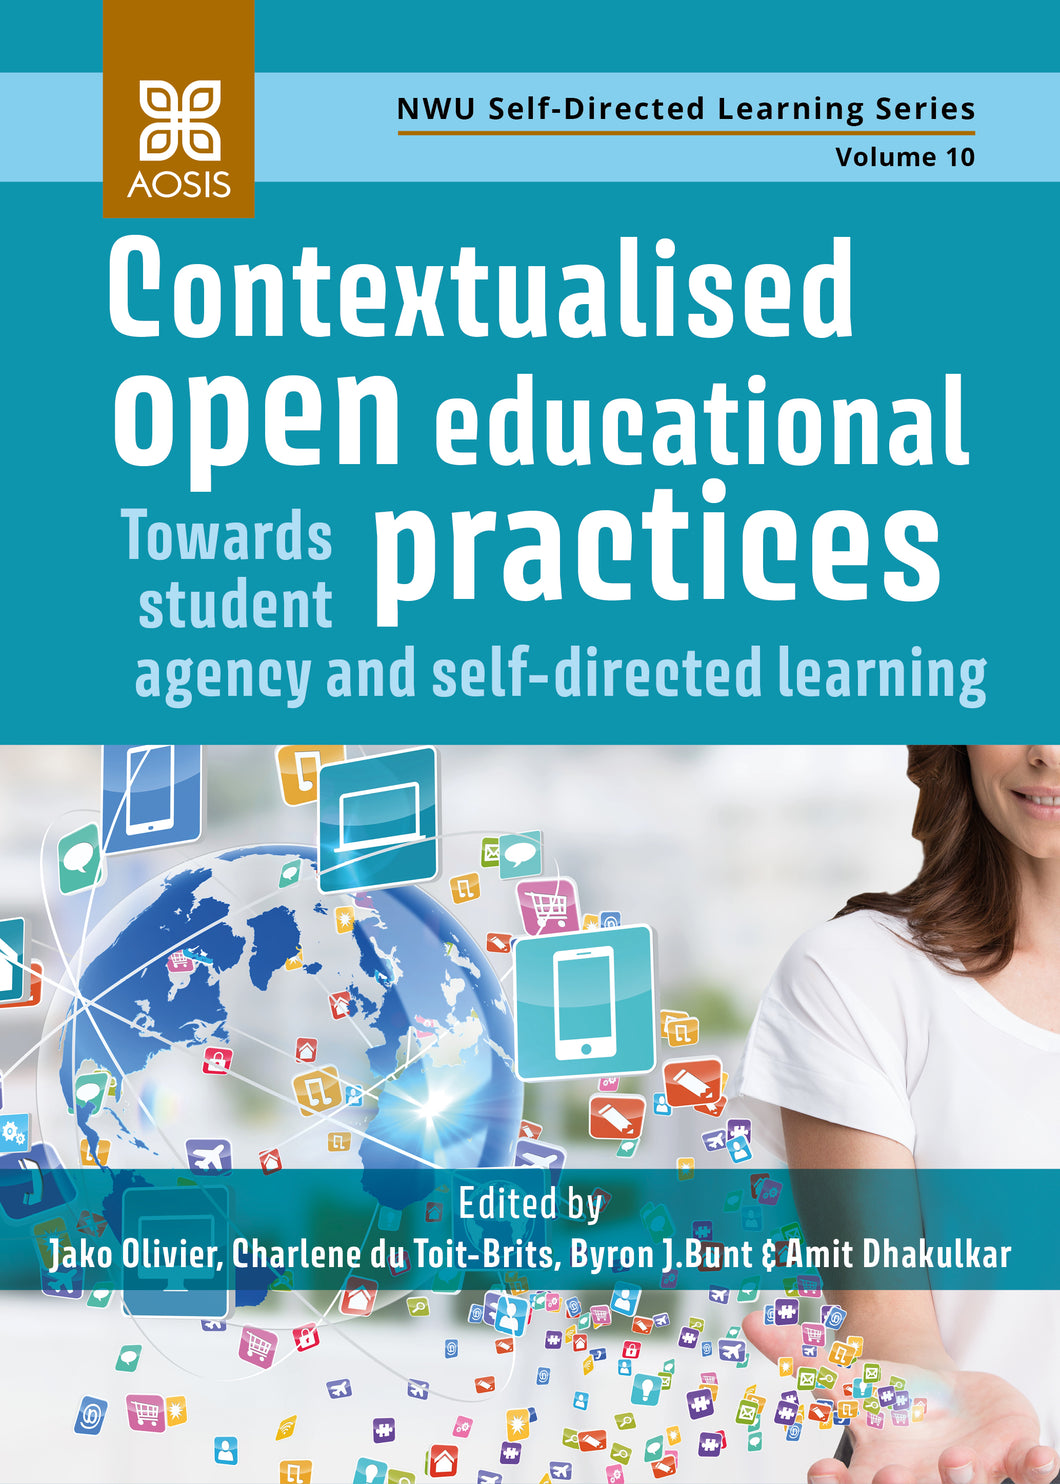 Contextualised open educational practices: Towards student agency and self-directed learning